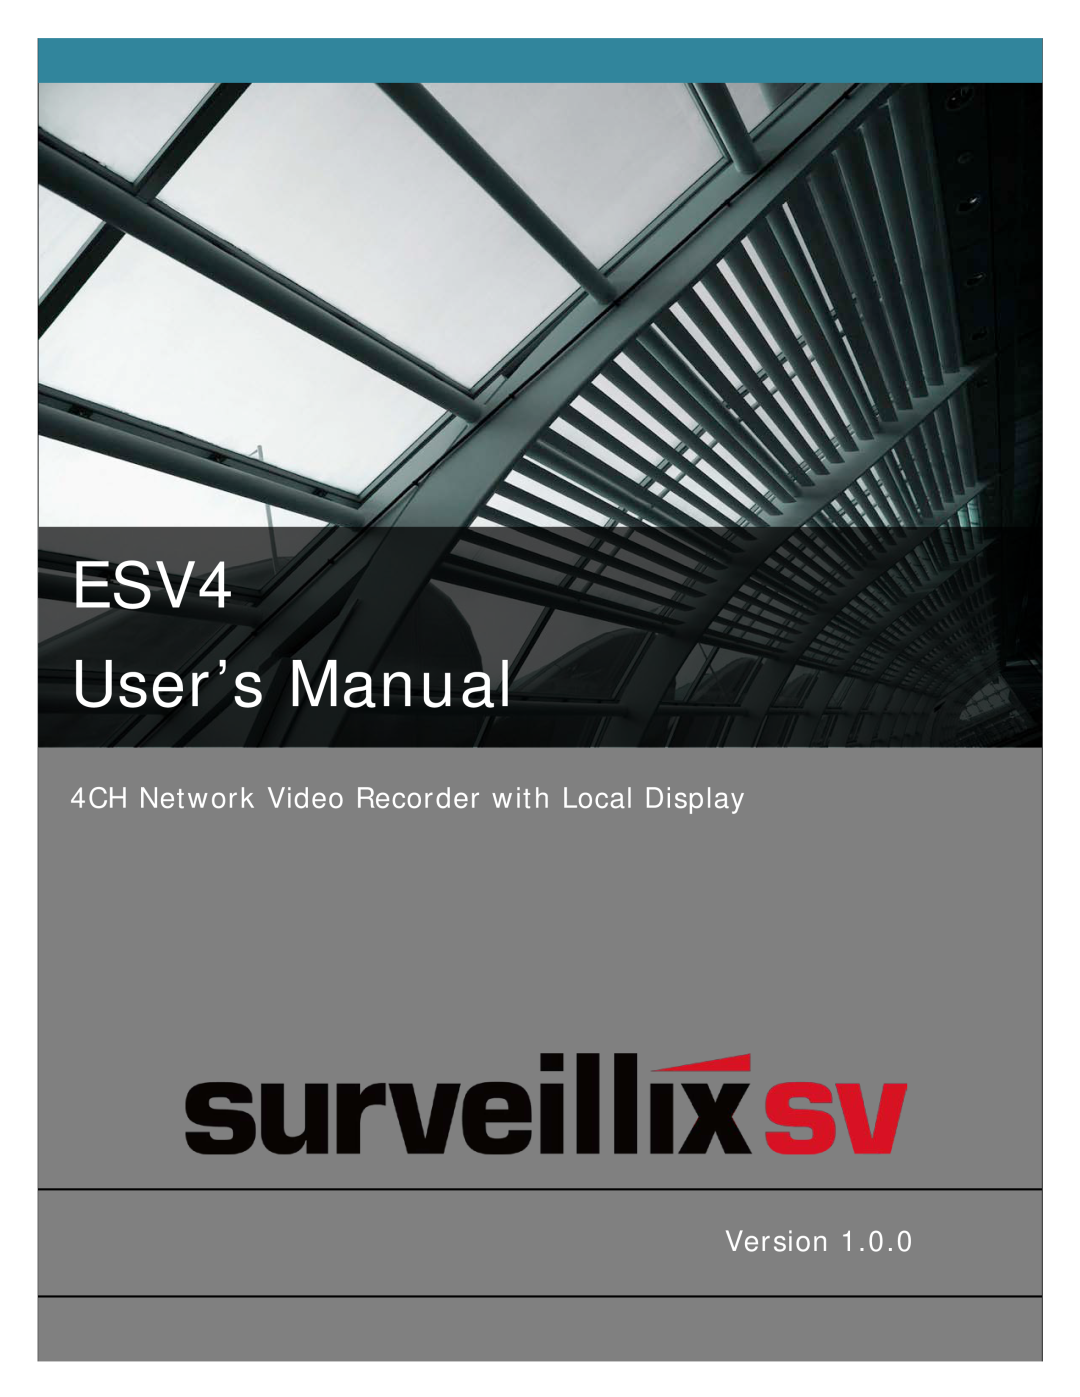 Toshiba ESV41T user manual ESV4 User’s Manual, 4CH Network Video Recorder with Local Display, Version 